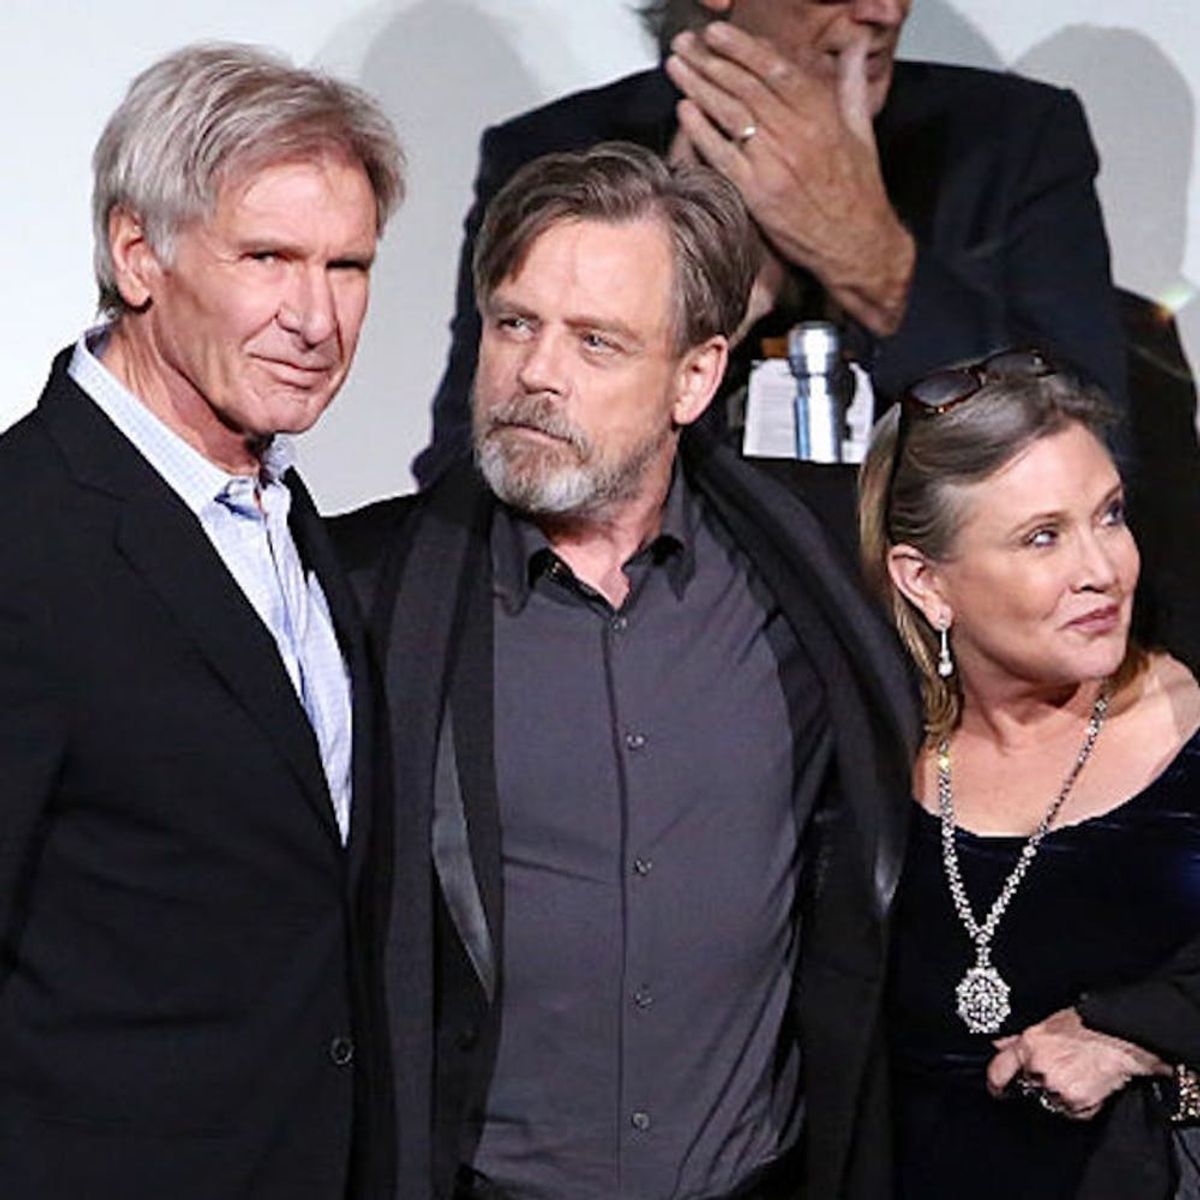 Morning Buzz! Carrie Fisher Dropped the Harrison Ford Affair Truth Bomb Star Wars Fans Have Waited Forever For + More